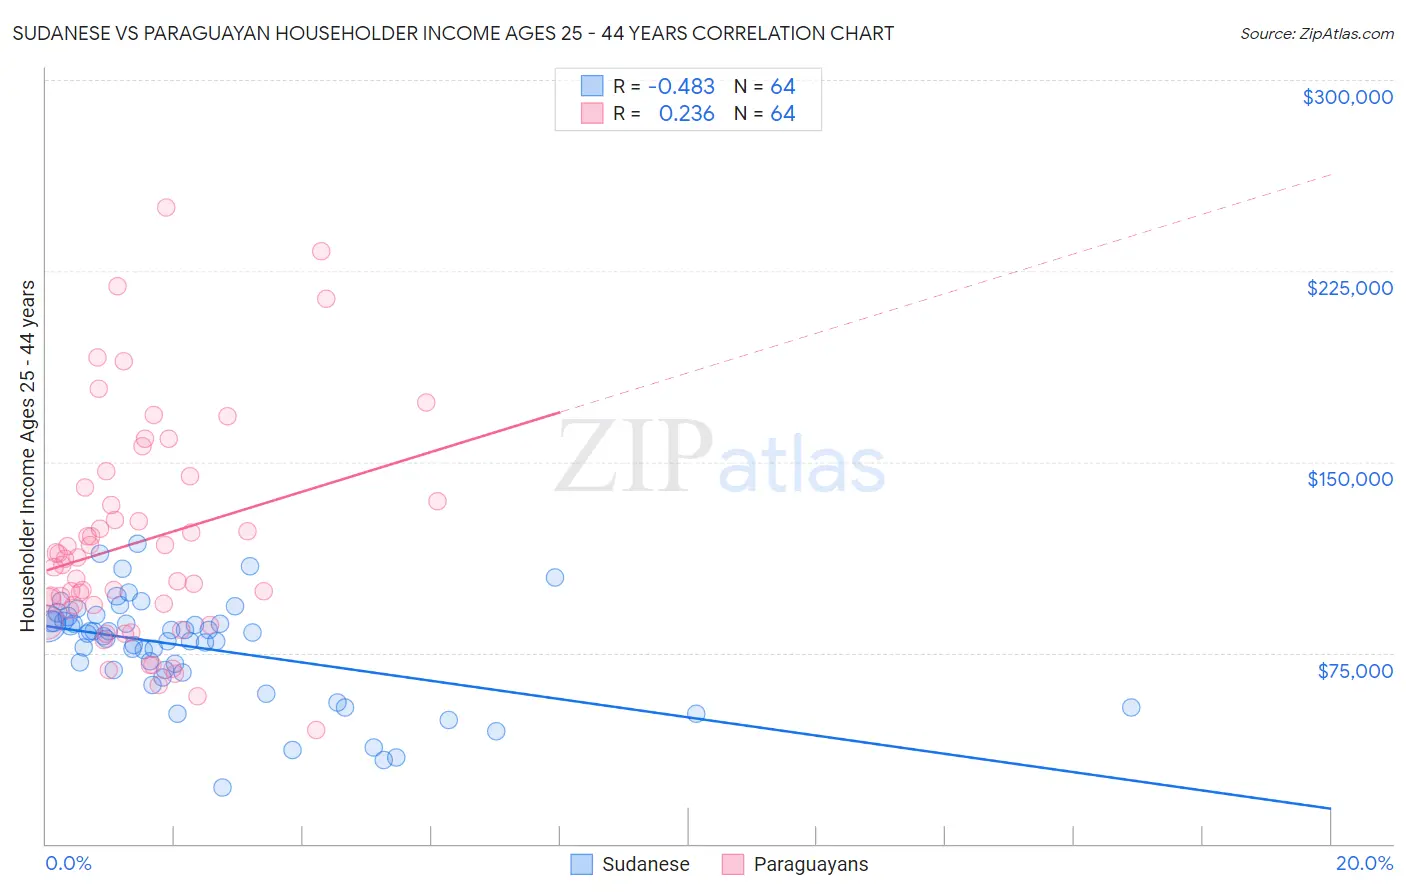 Sudanese vs Paraguayan Householder Income Ages 25 - 44 years